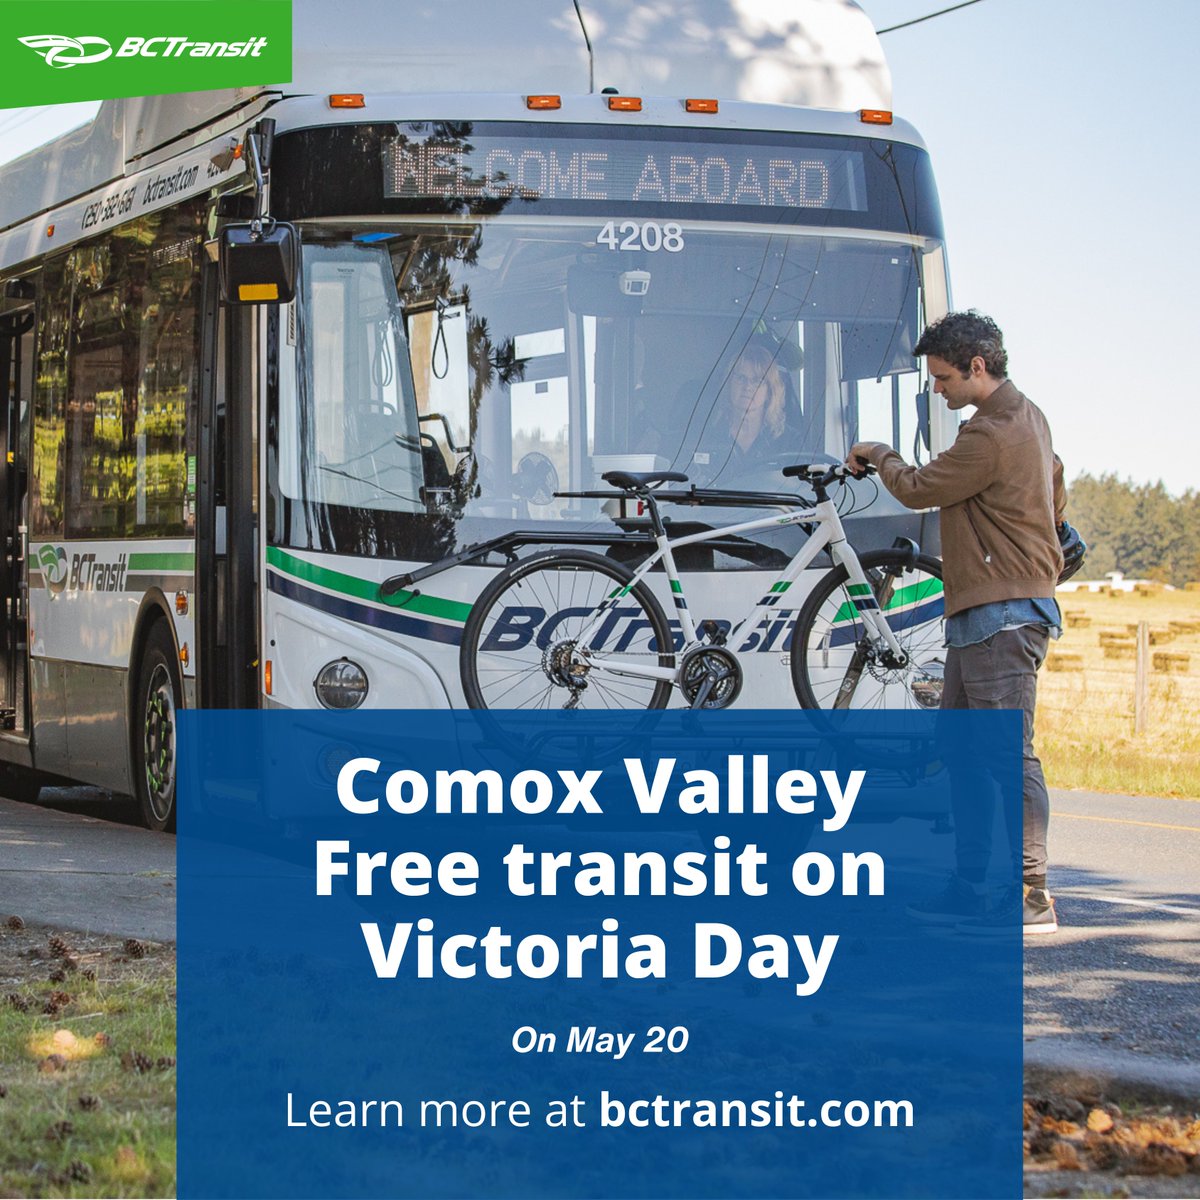 👋 Hey #ComoxValley! #Transit is free on May 20, Victoria Day.  💙🚌

On the holiday Monday, buses will be running on a Saturday schedule, so please check bctransit.com to plan your trip and sign up for alerts.

Details here 👉 bctransit.com/comox-valley/